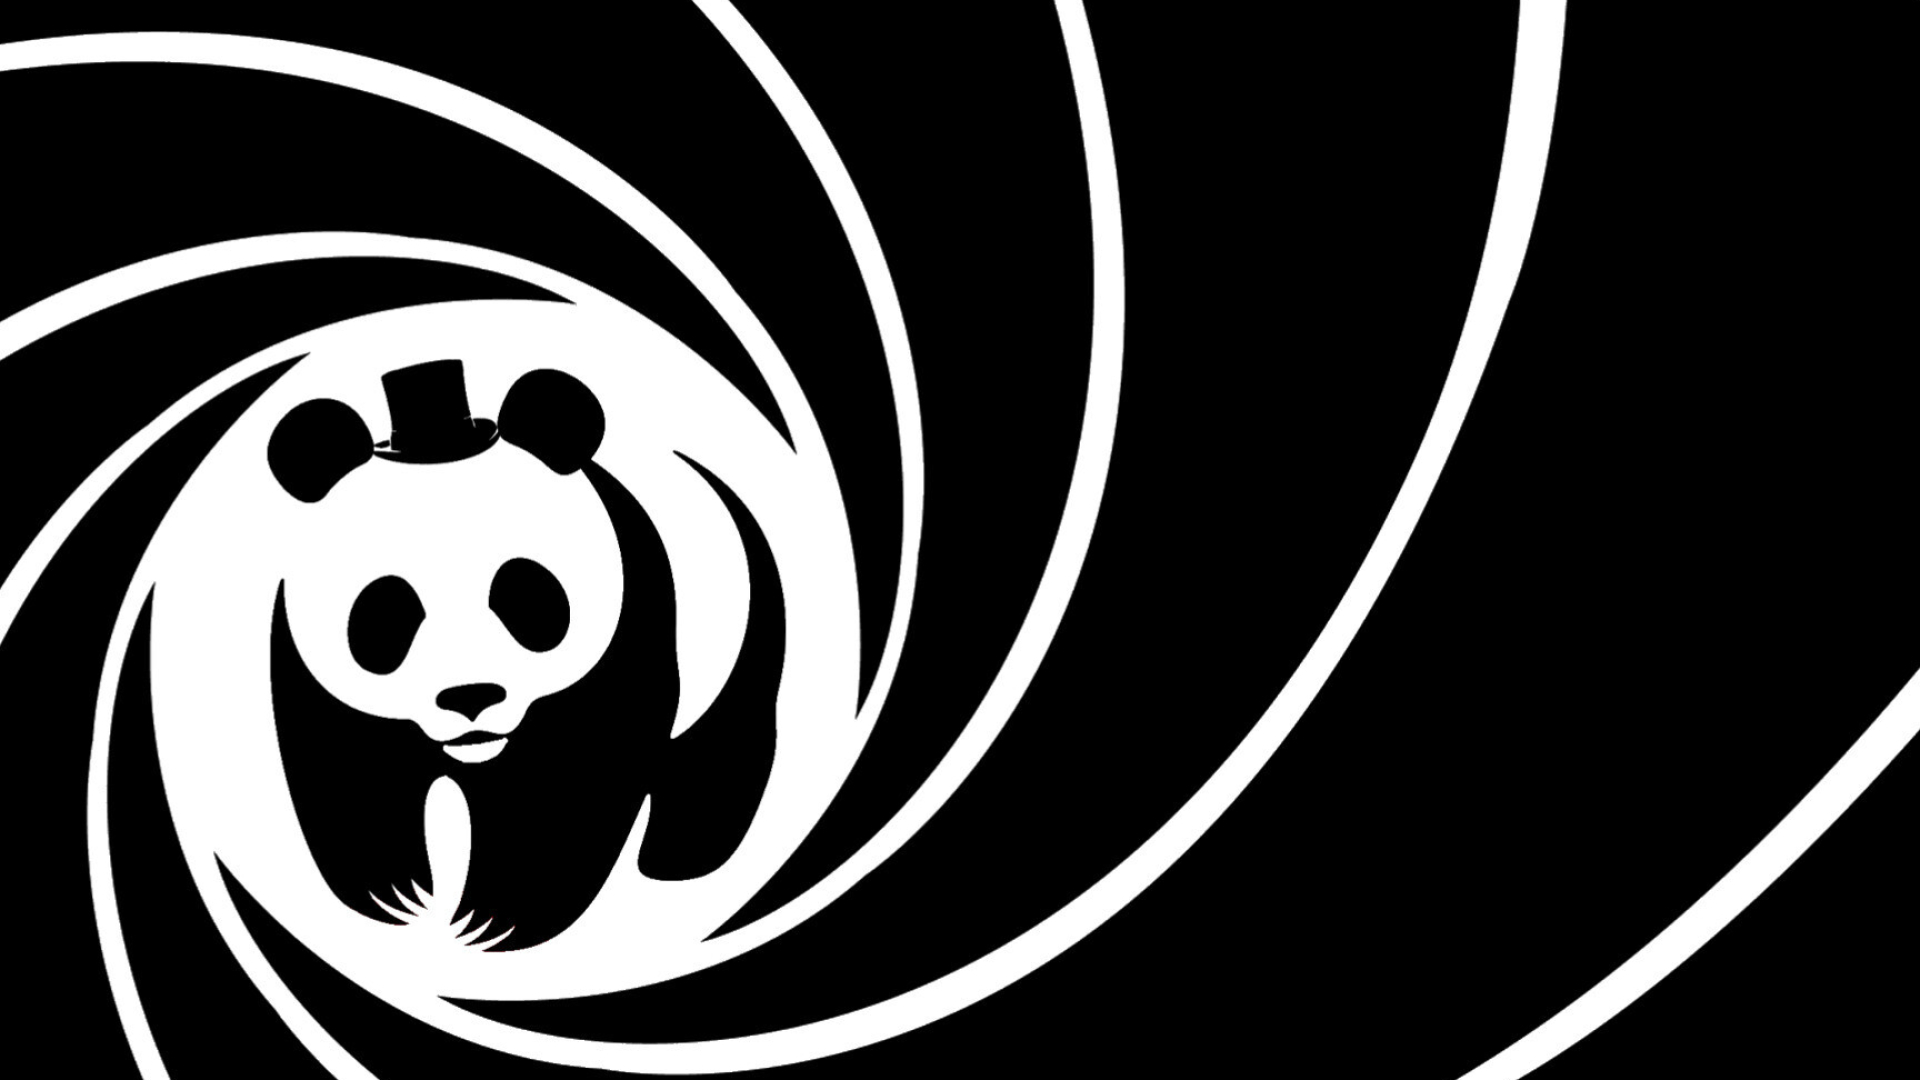 Panda: Bear inhabiting bamboo forests in the mountains of central China, Monochrome. 1920x1080 Full HD Wallpaper.